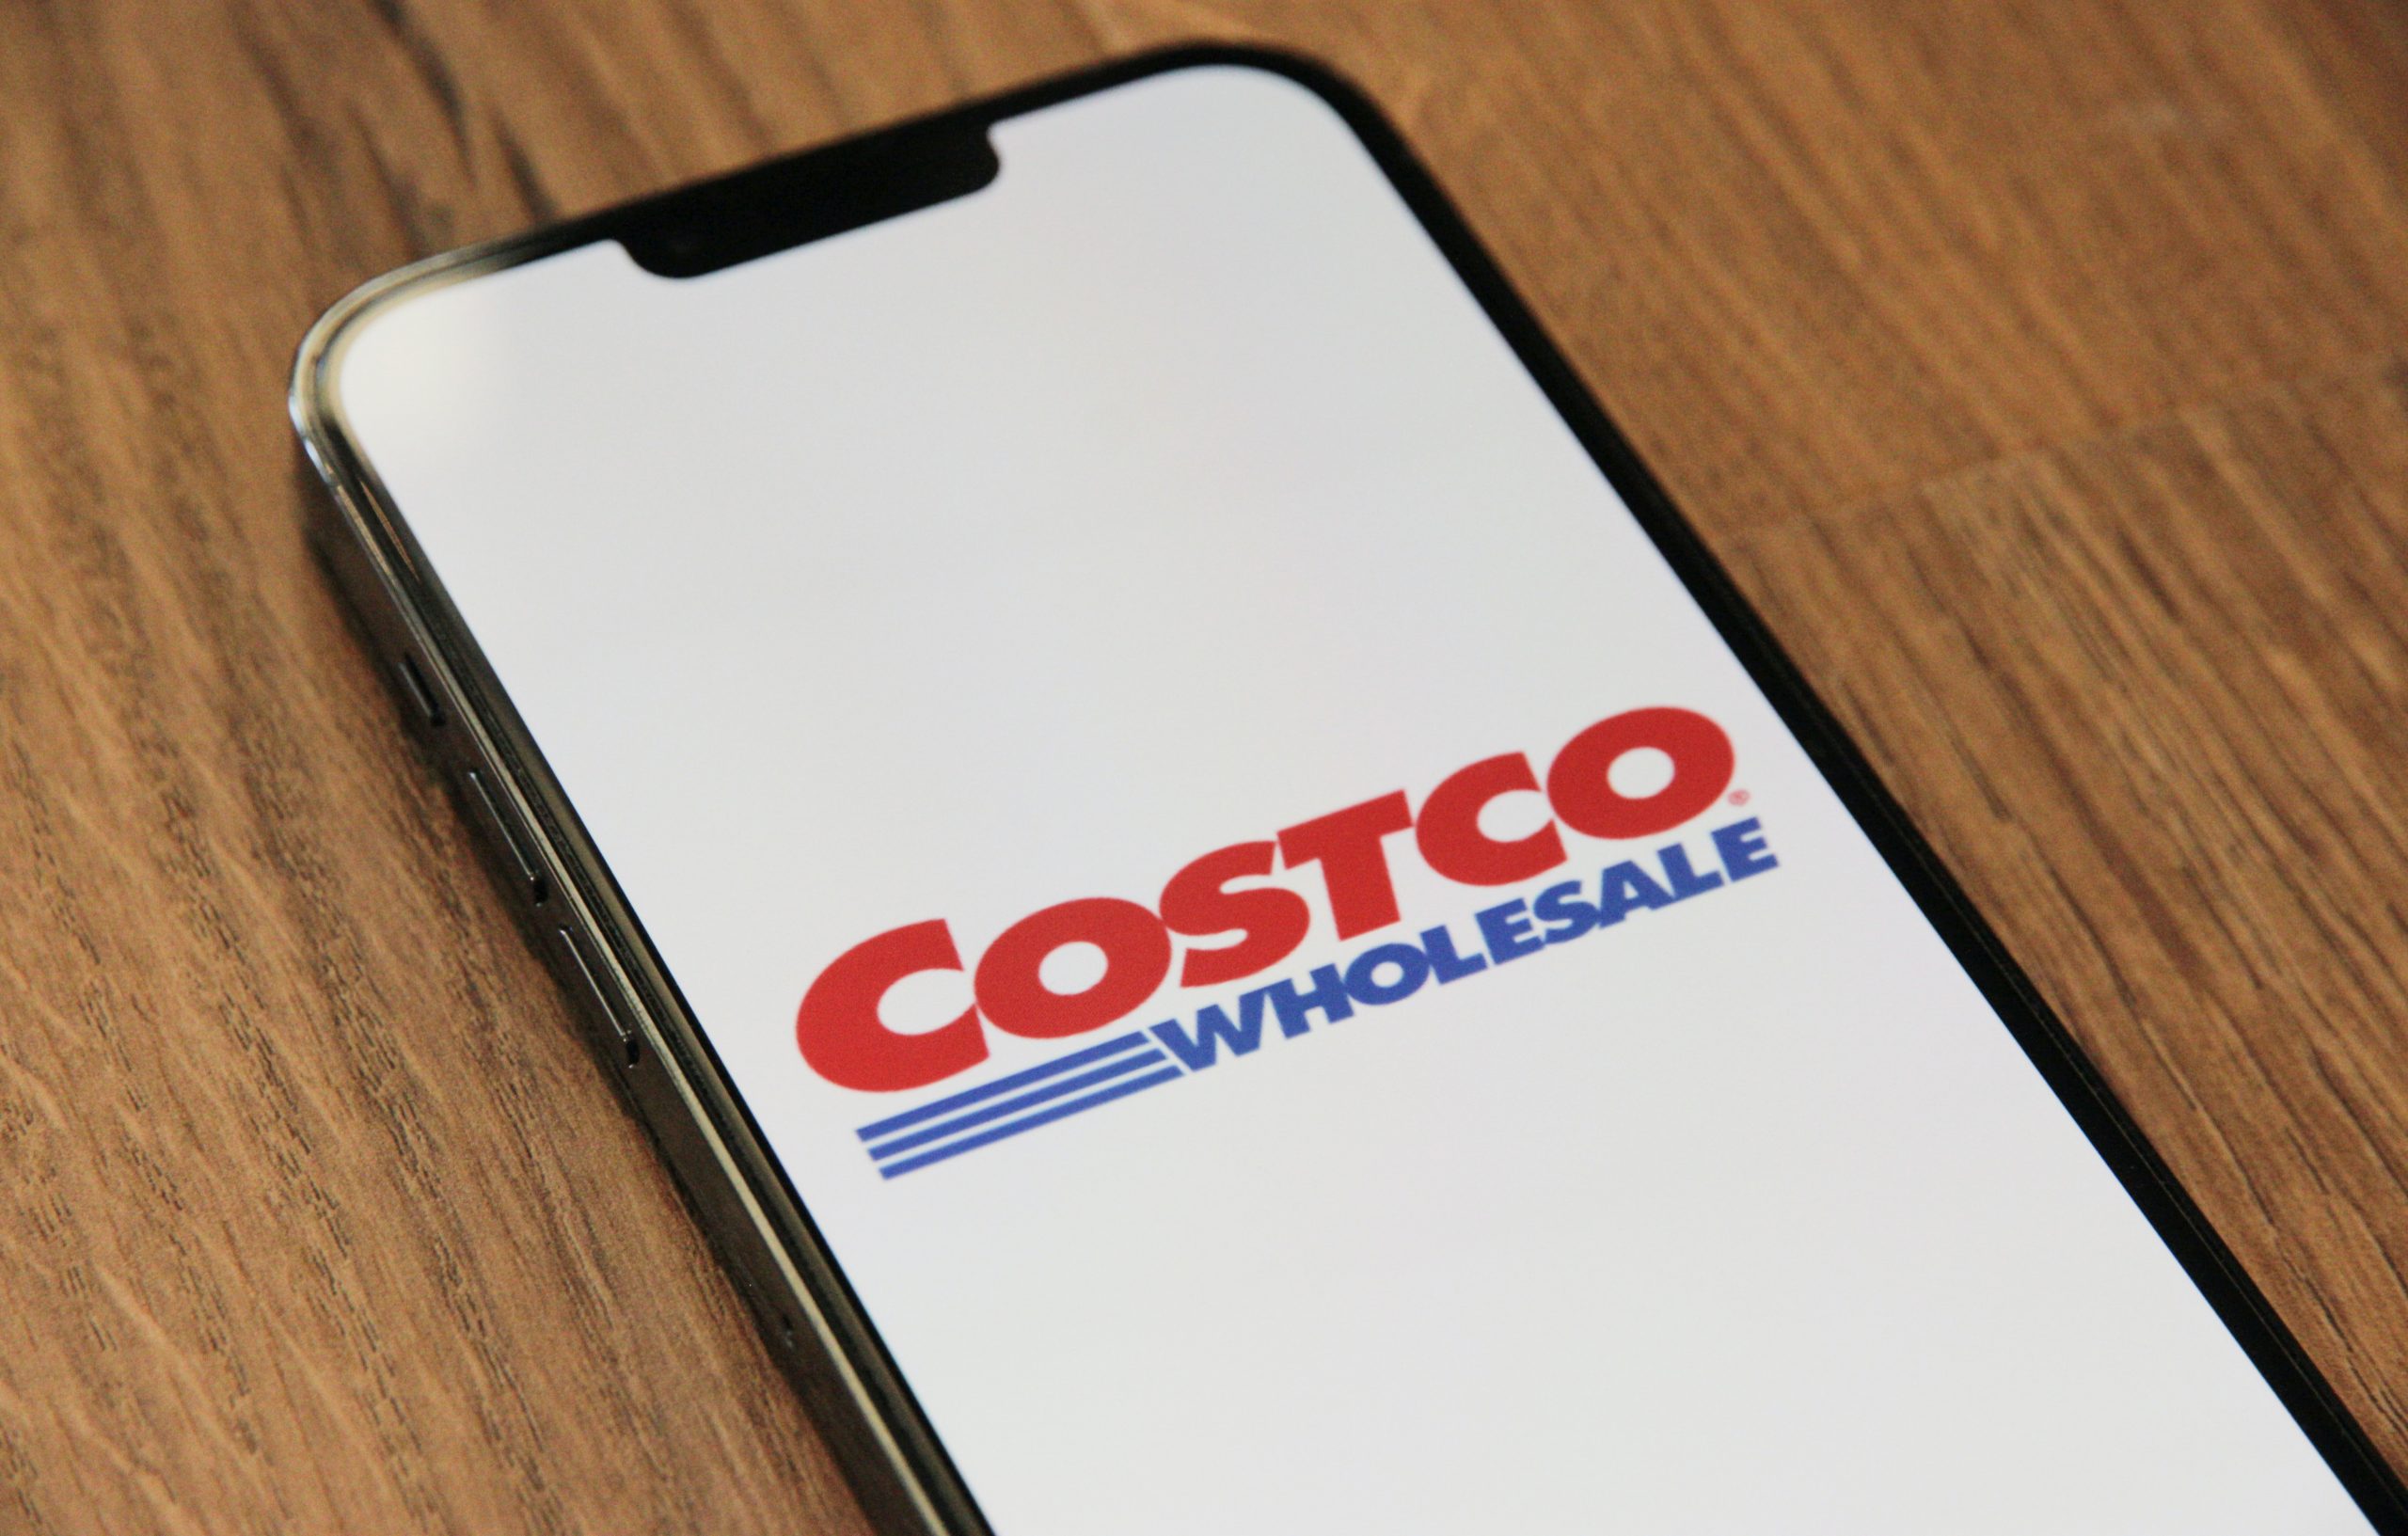 Does Costco do cash back?